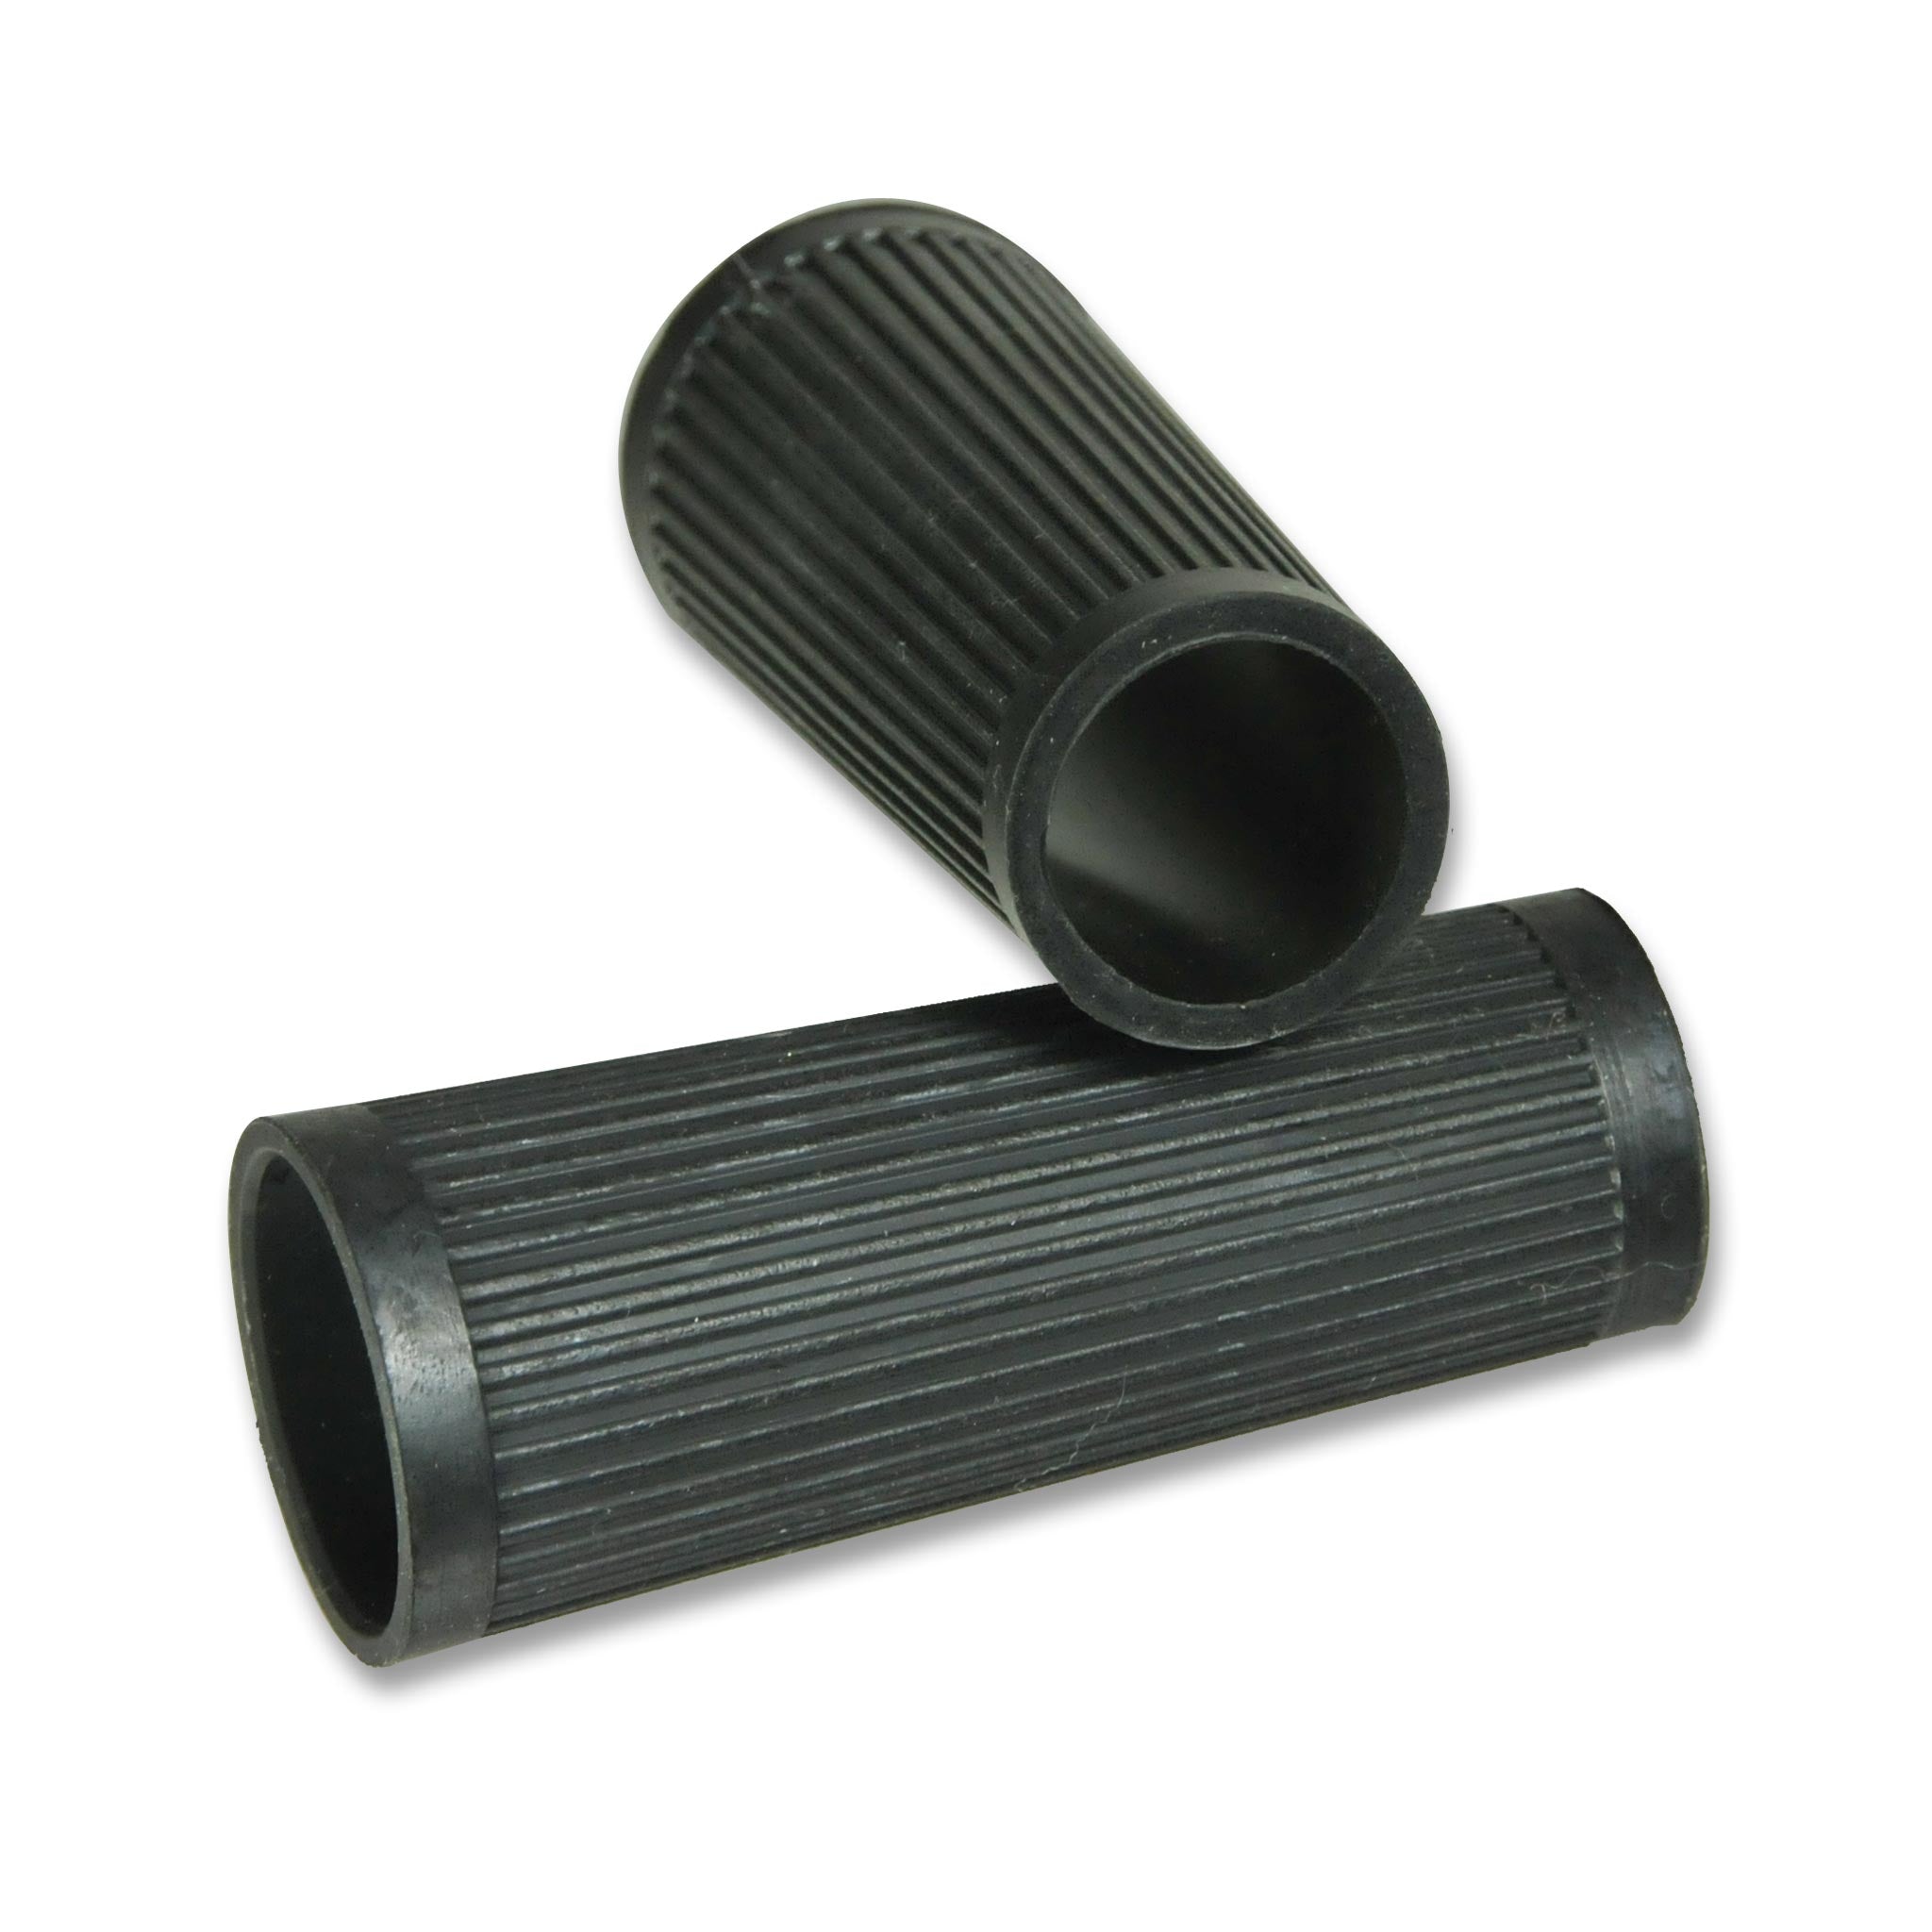 Rubber Grip for Squeegee Handles